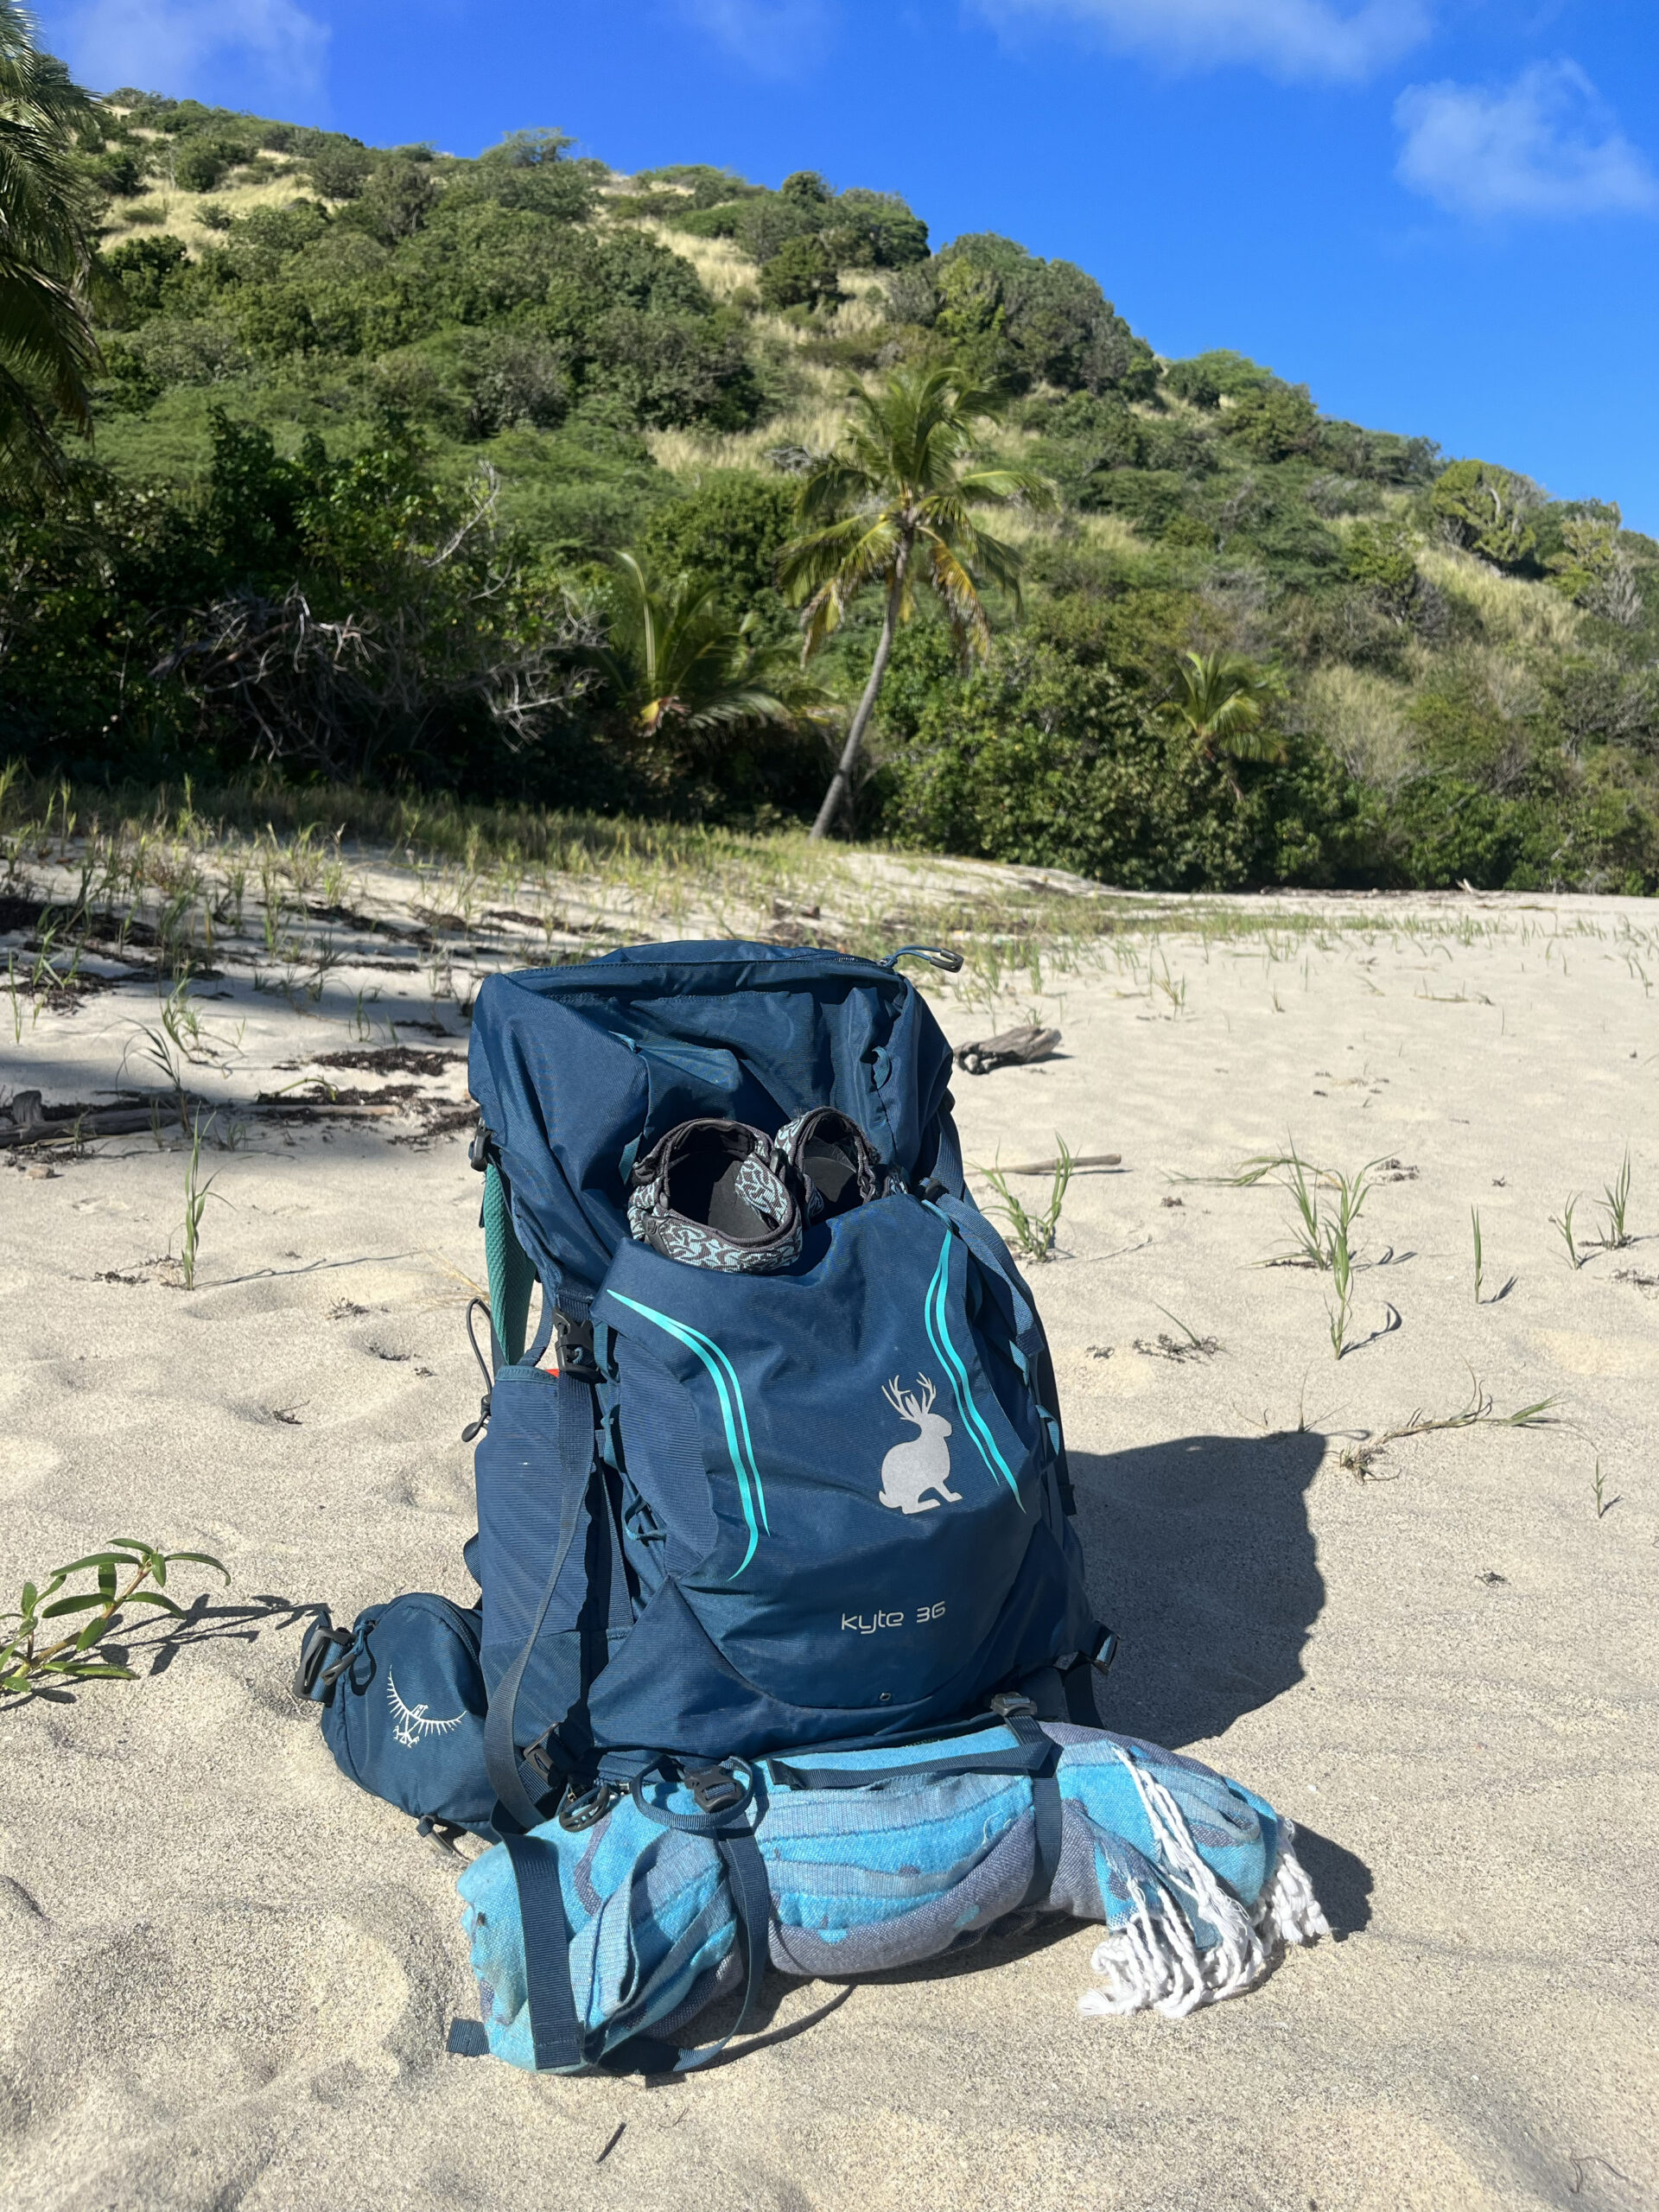 I stored my wet and sandy towel on the outside of my pack to keep the inside clean for snacks and clothes on the beach.